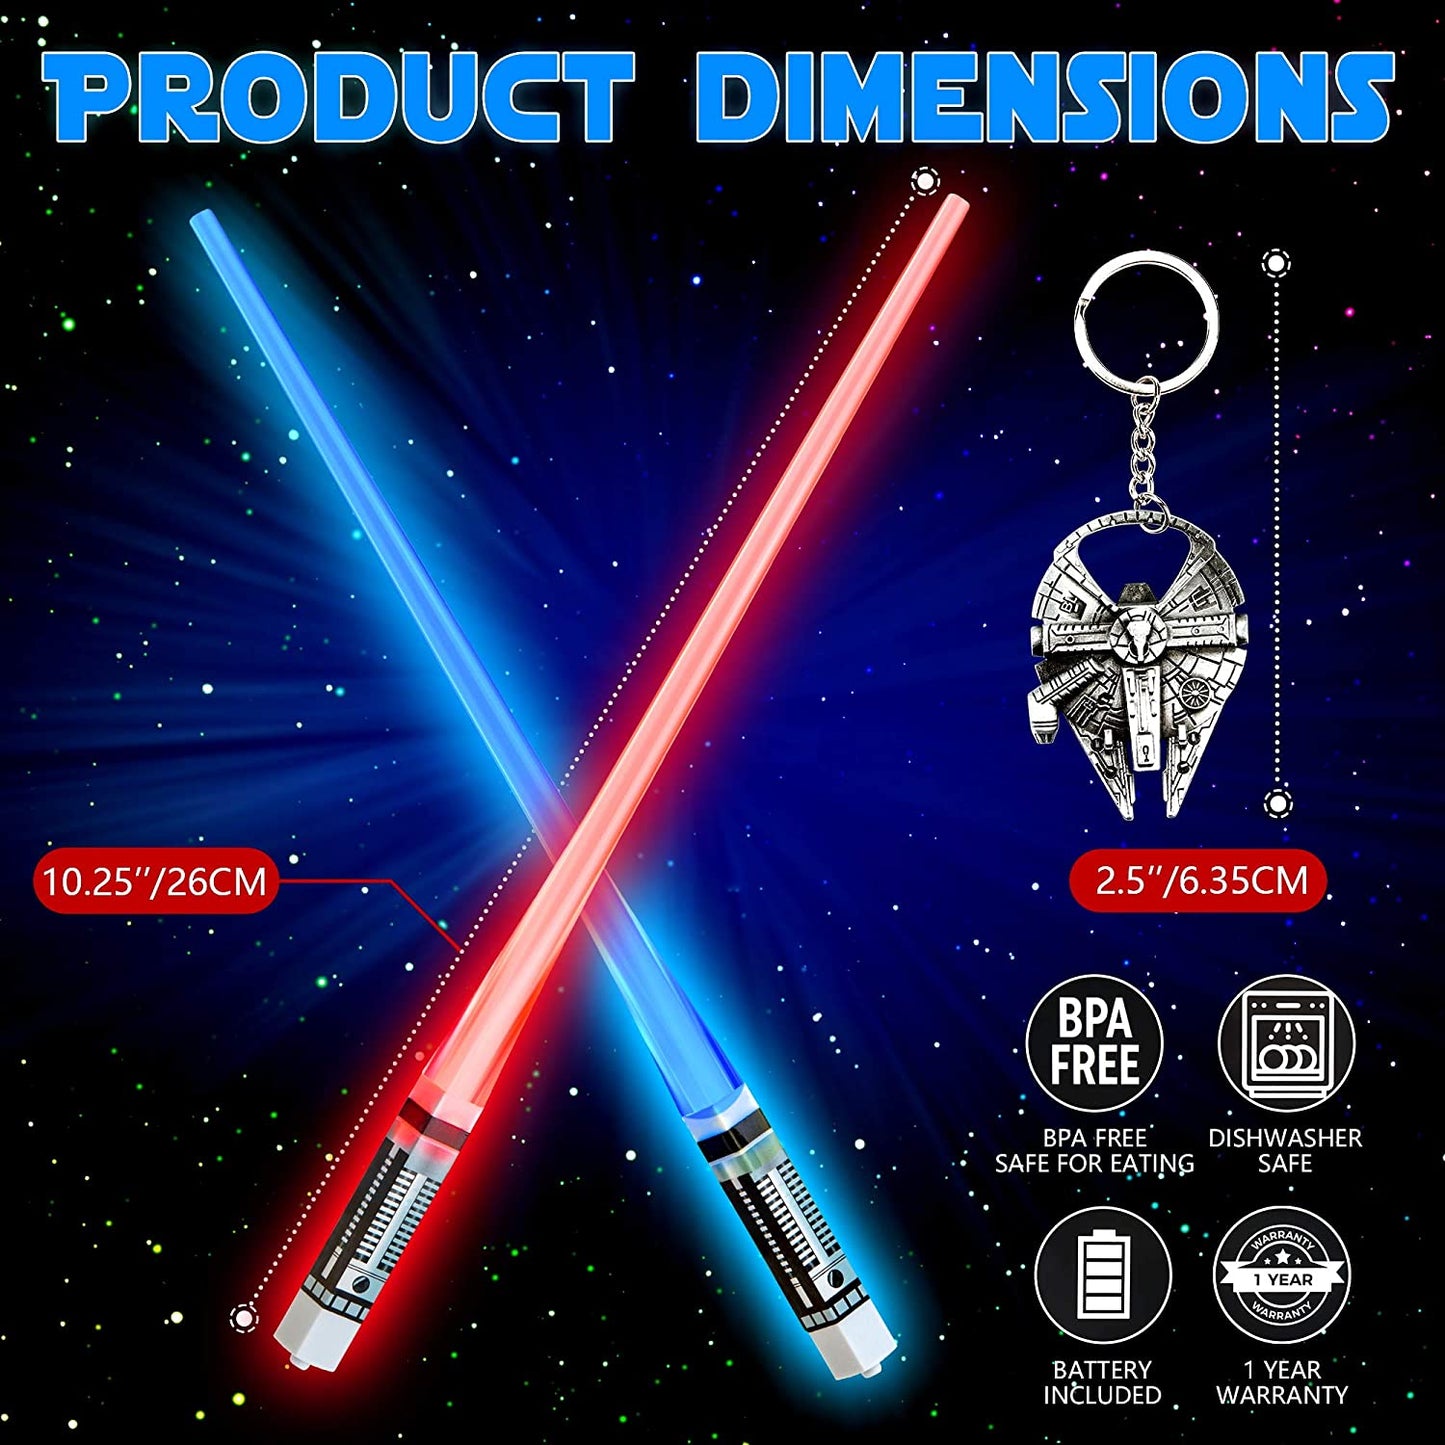 Product dimensions for Star Wars lightsaber chopsticks. They have a measurement of 26cm. There is text which says, 'BPA free. Dishwasher safe. Battery included. 1 year warranty.'